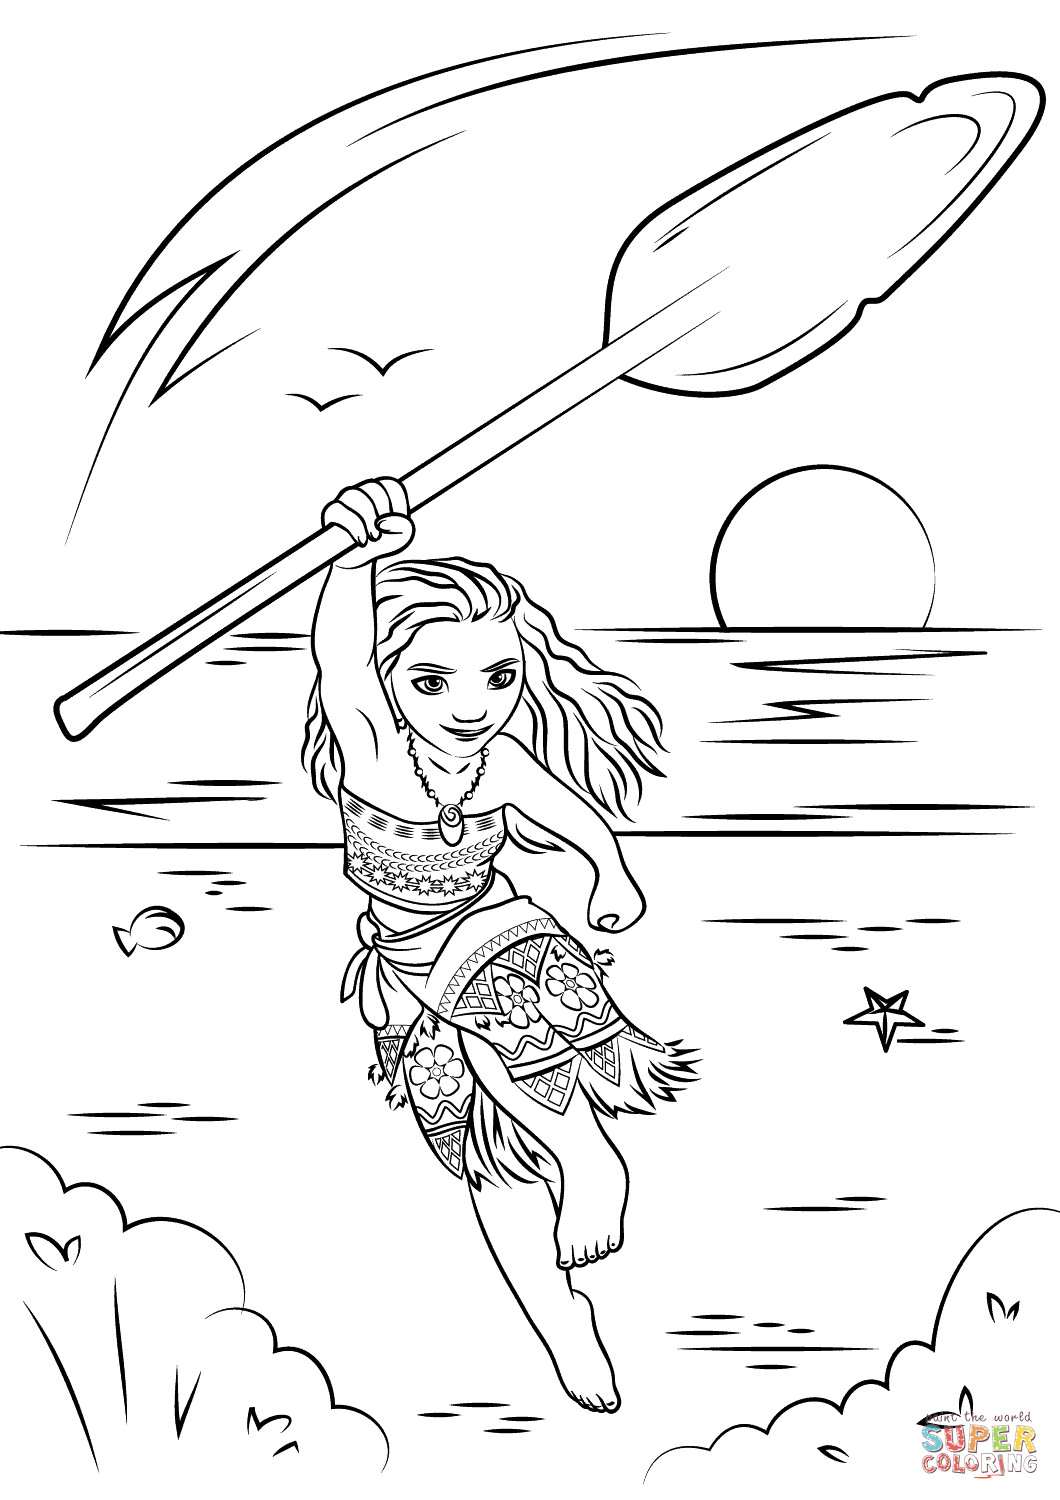 Printable Moana Coloring Pages
 Moana coloring page